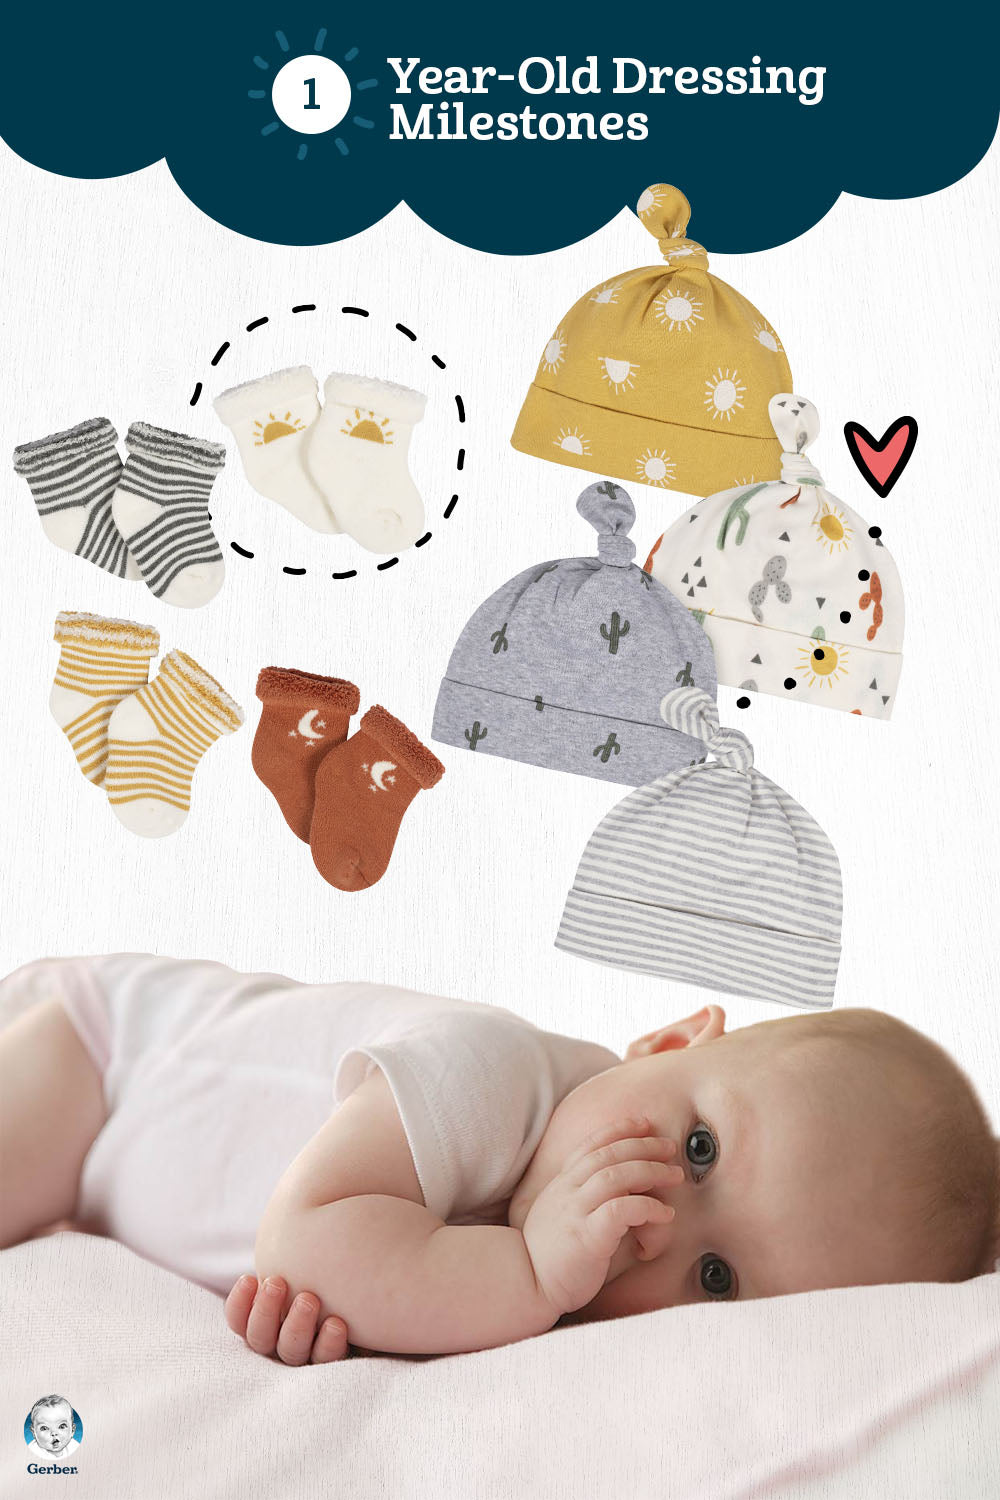 . An enchanting visual journey through a baby's first year of fashion accomplishments, beautifully depicted.